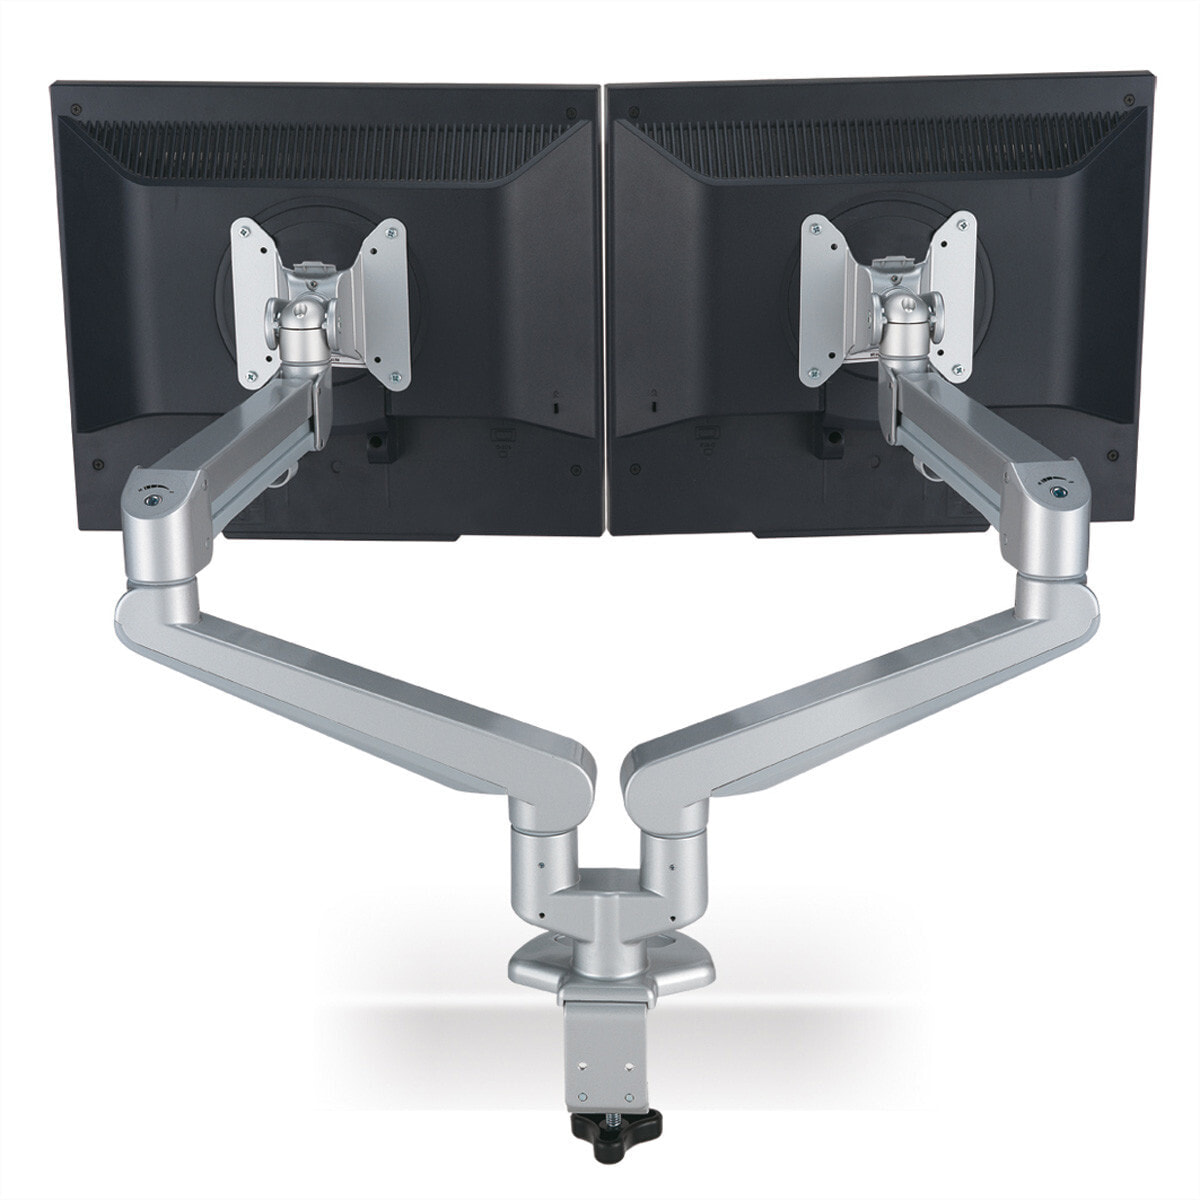 ROLINE Dual LCD Monitor Stand Pneumatic, Desk Clamp, Pivot 2 Joints 17.03.1148